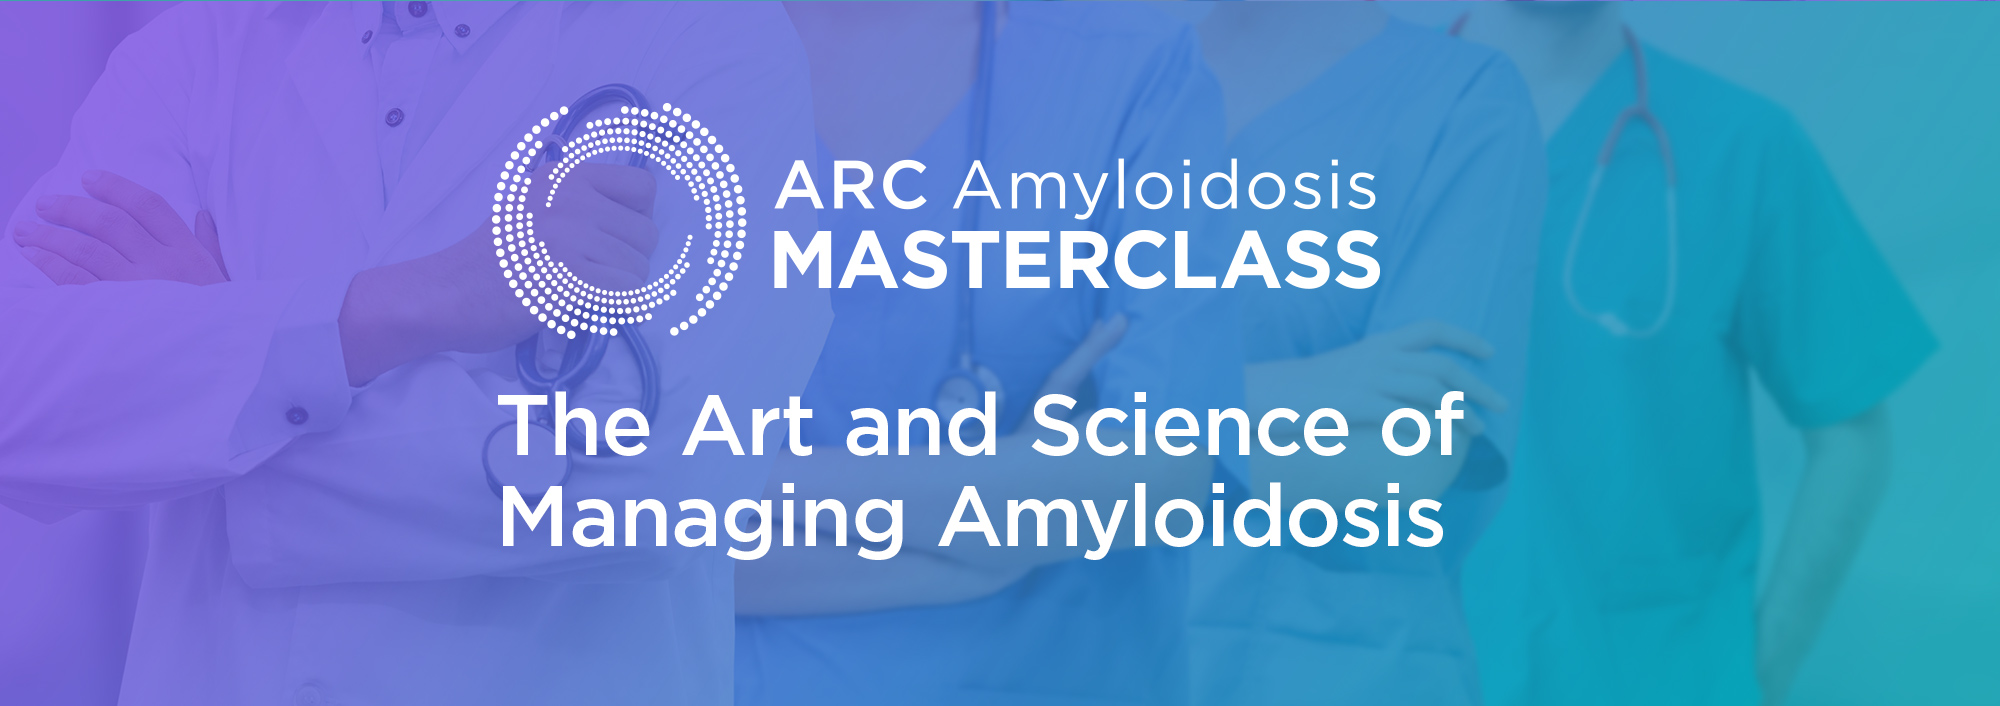 ARC Amyloidosis Masterclass: The Art and Science of Managing Amyloidosis